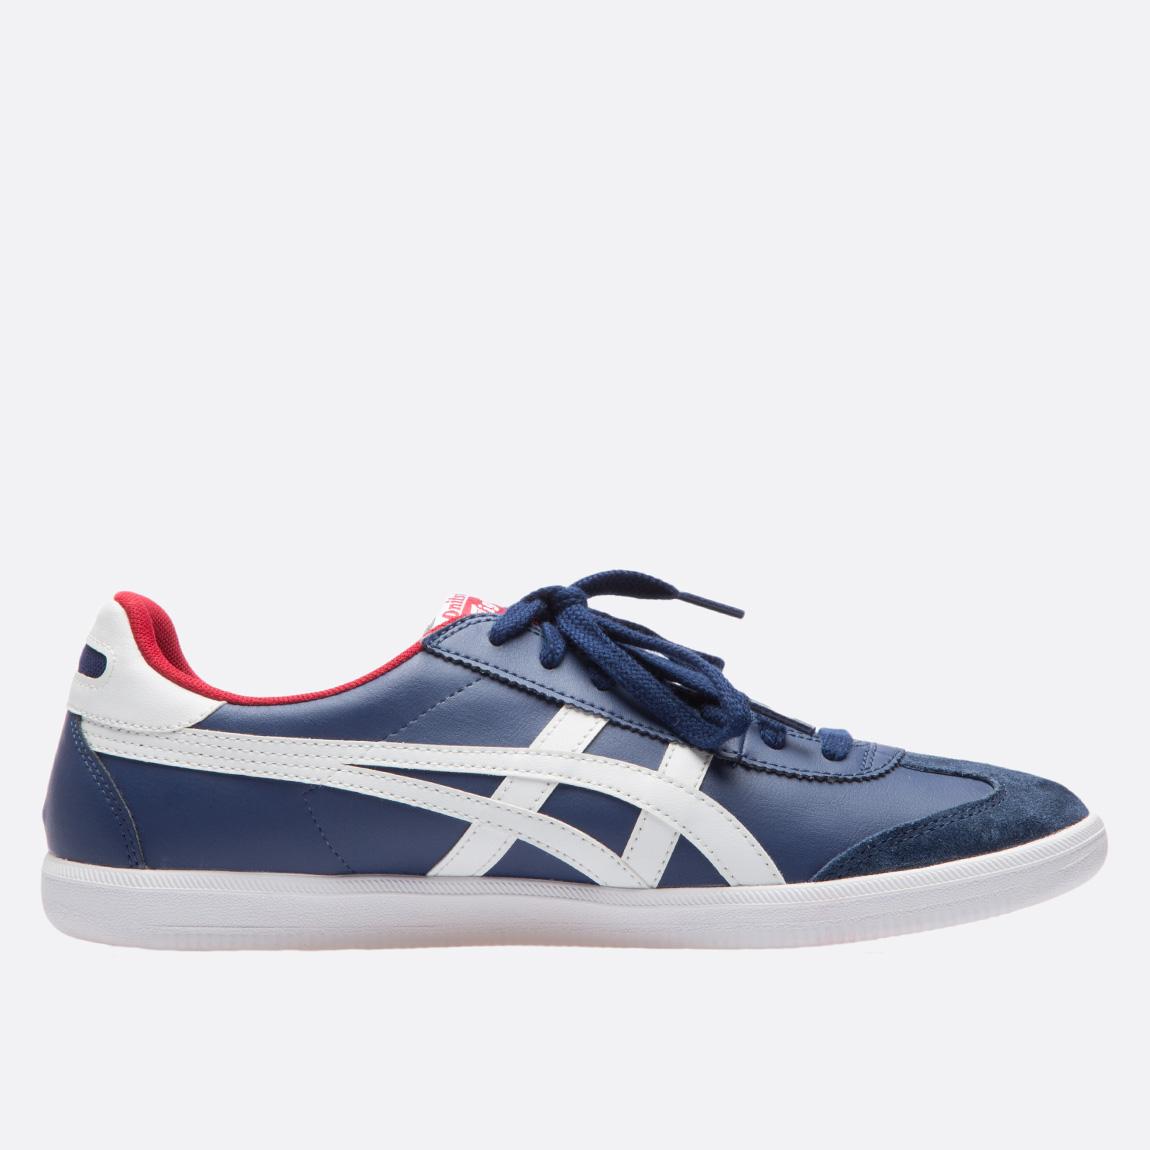 Tokuten D3B3Y-5001 – Blue, White & Red Onitsuka Tiger Sneakers ...